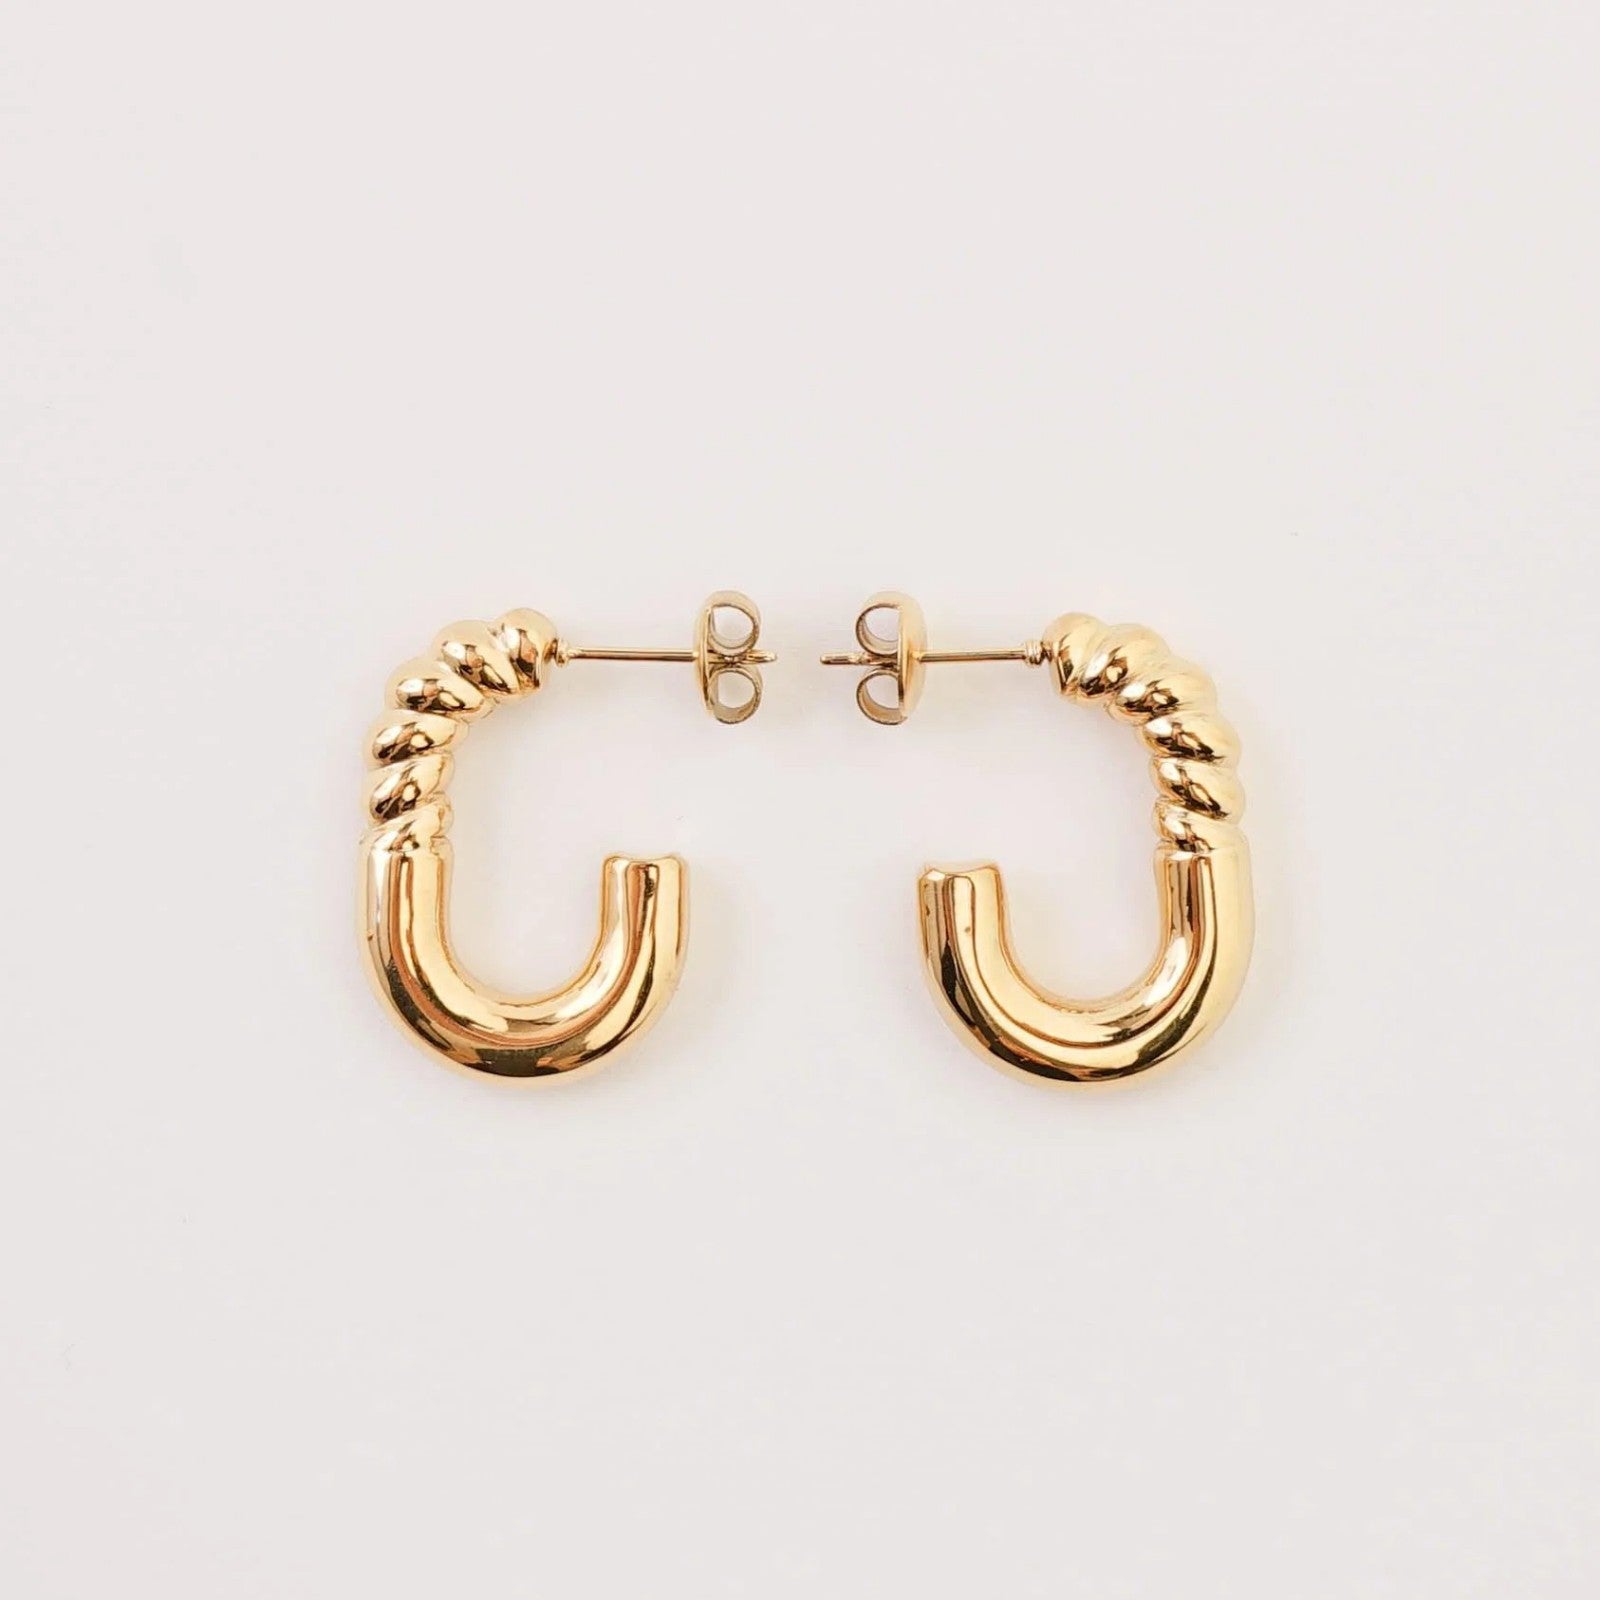 Hip Hop Chunky Earrings, Stainless Steel, Gold-toned Hoops